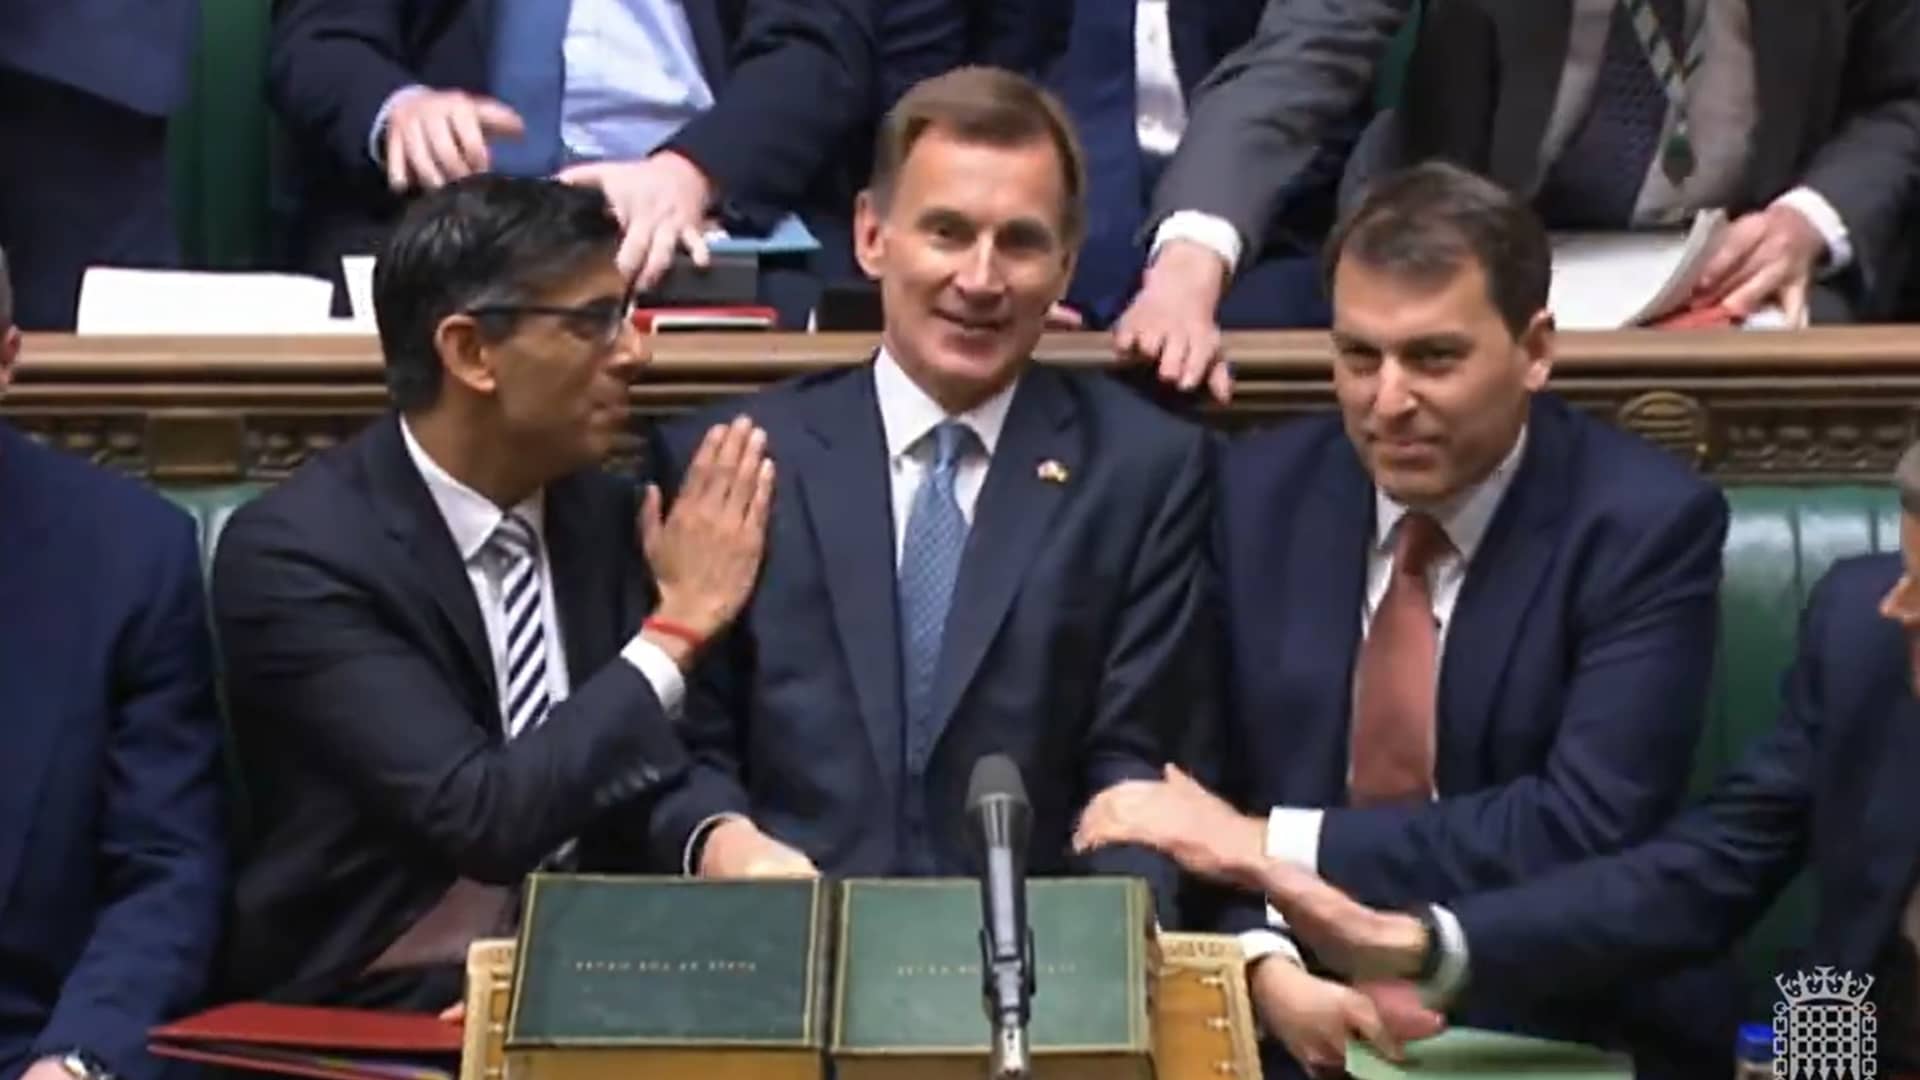 LONDON - Prime Minister Rishi Sunak congratulates Chancellor of the Exchequer Jeremy Hunt after he delivered his autumn statement to MPs in the House of Commons, announcing a host of tax rises and spending cuts in an effort to balance the country's finances.